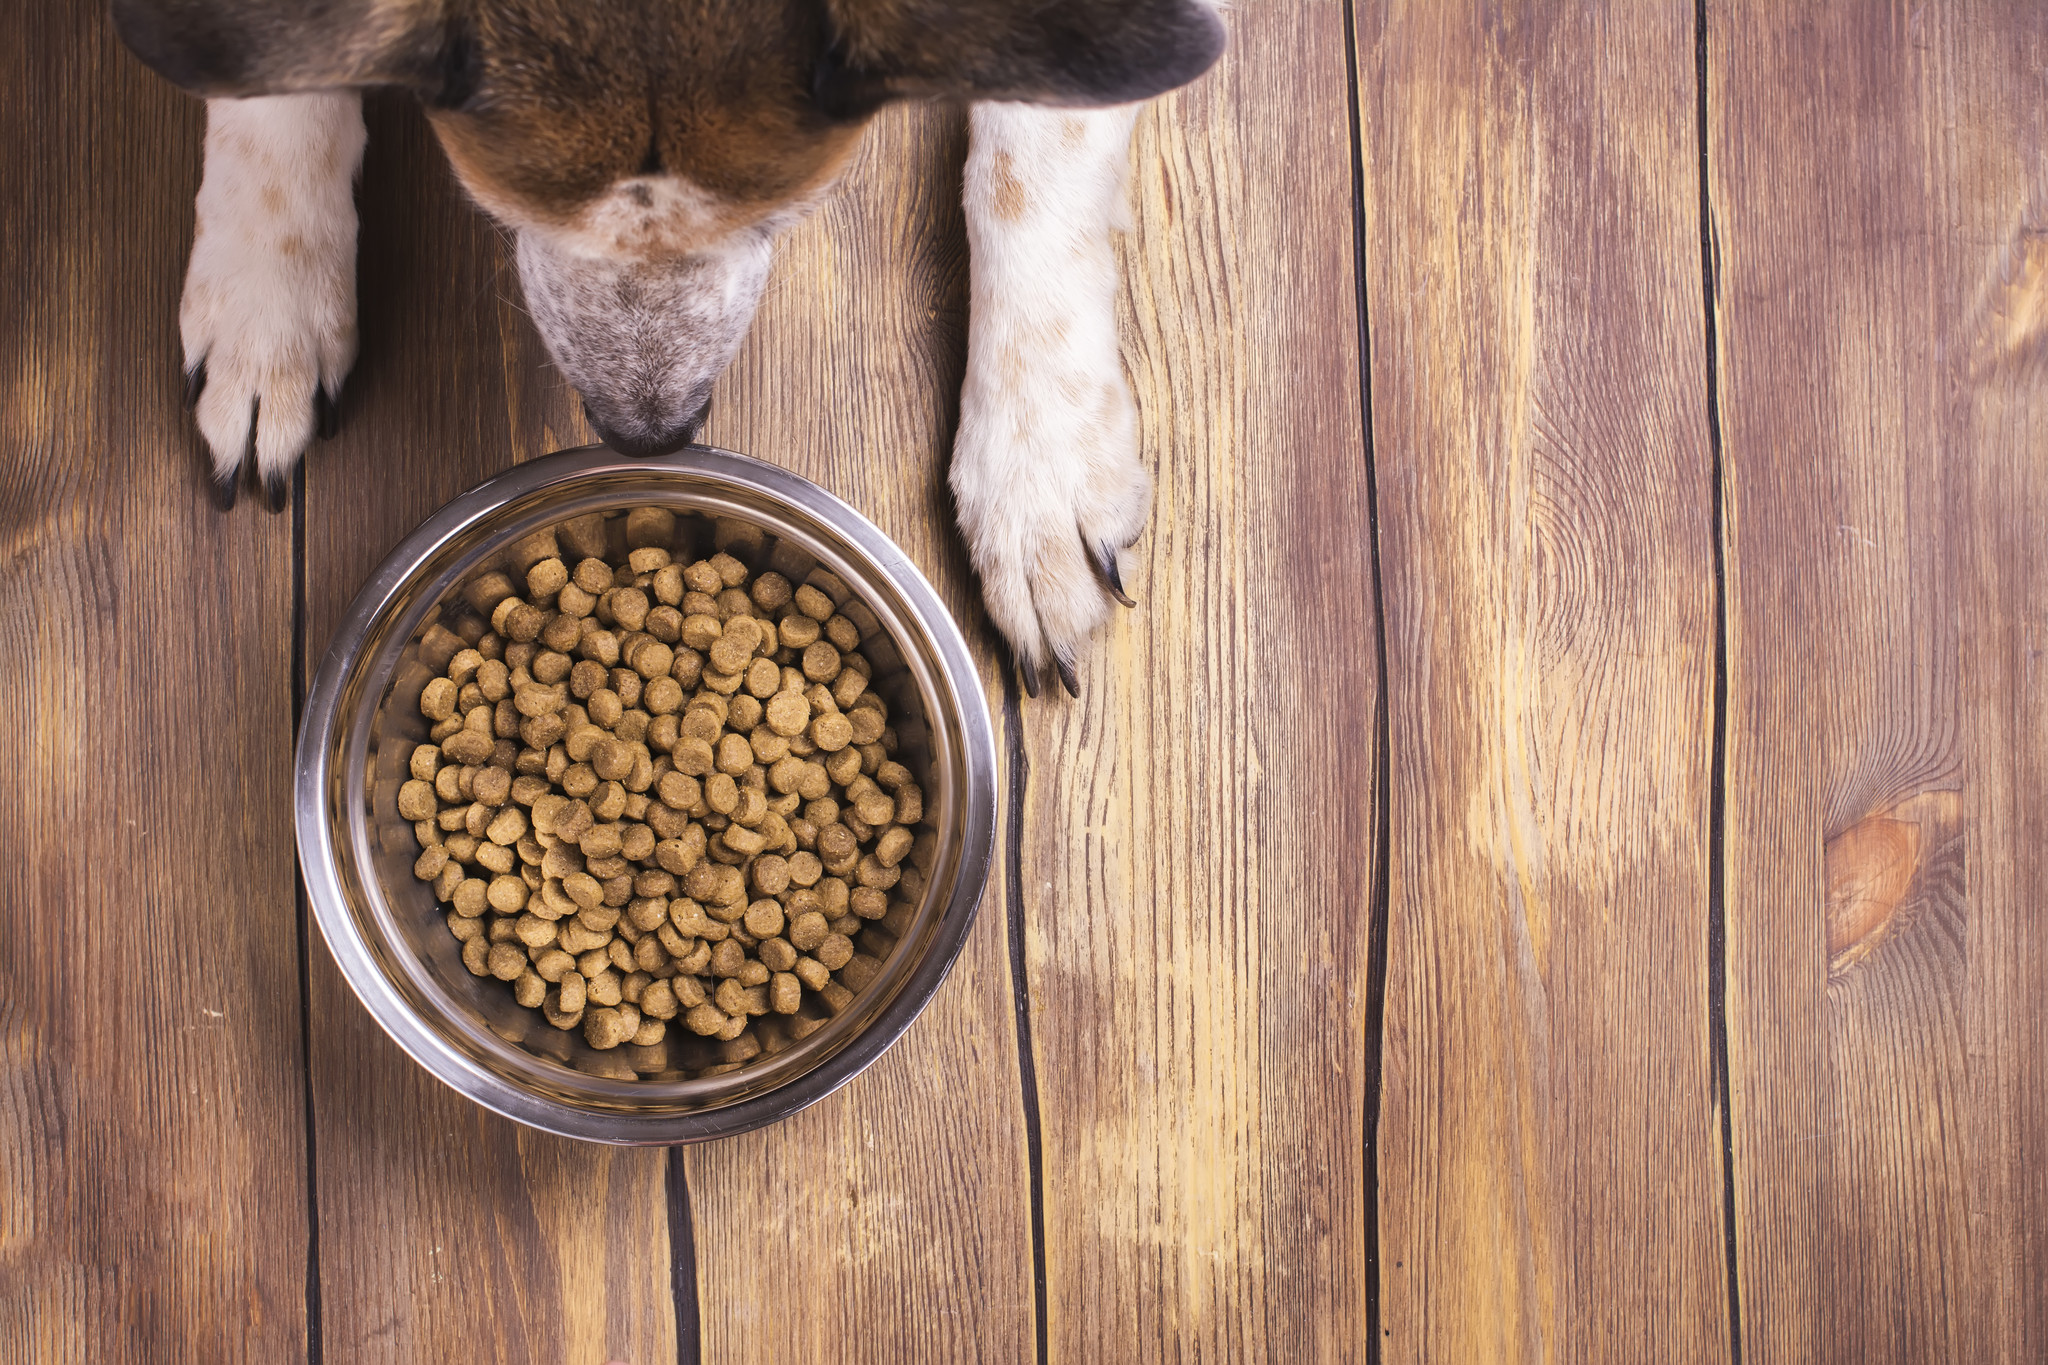 what dog food will a picky dog eat